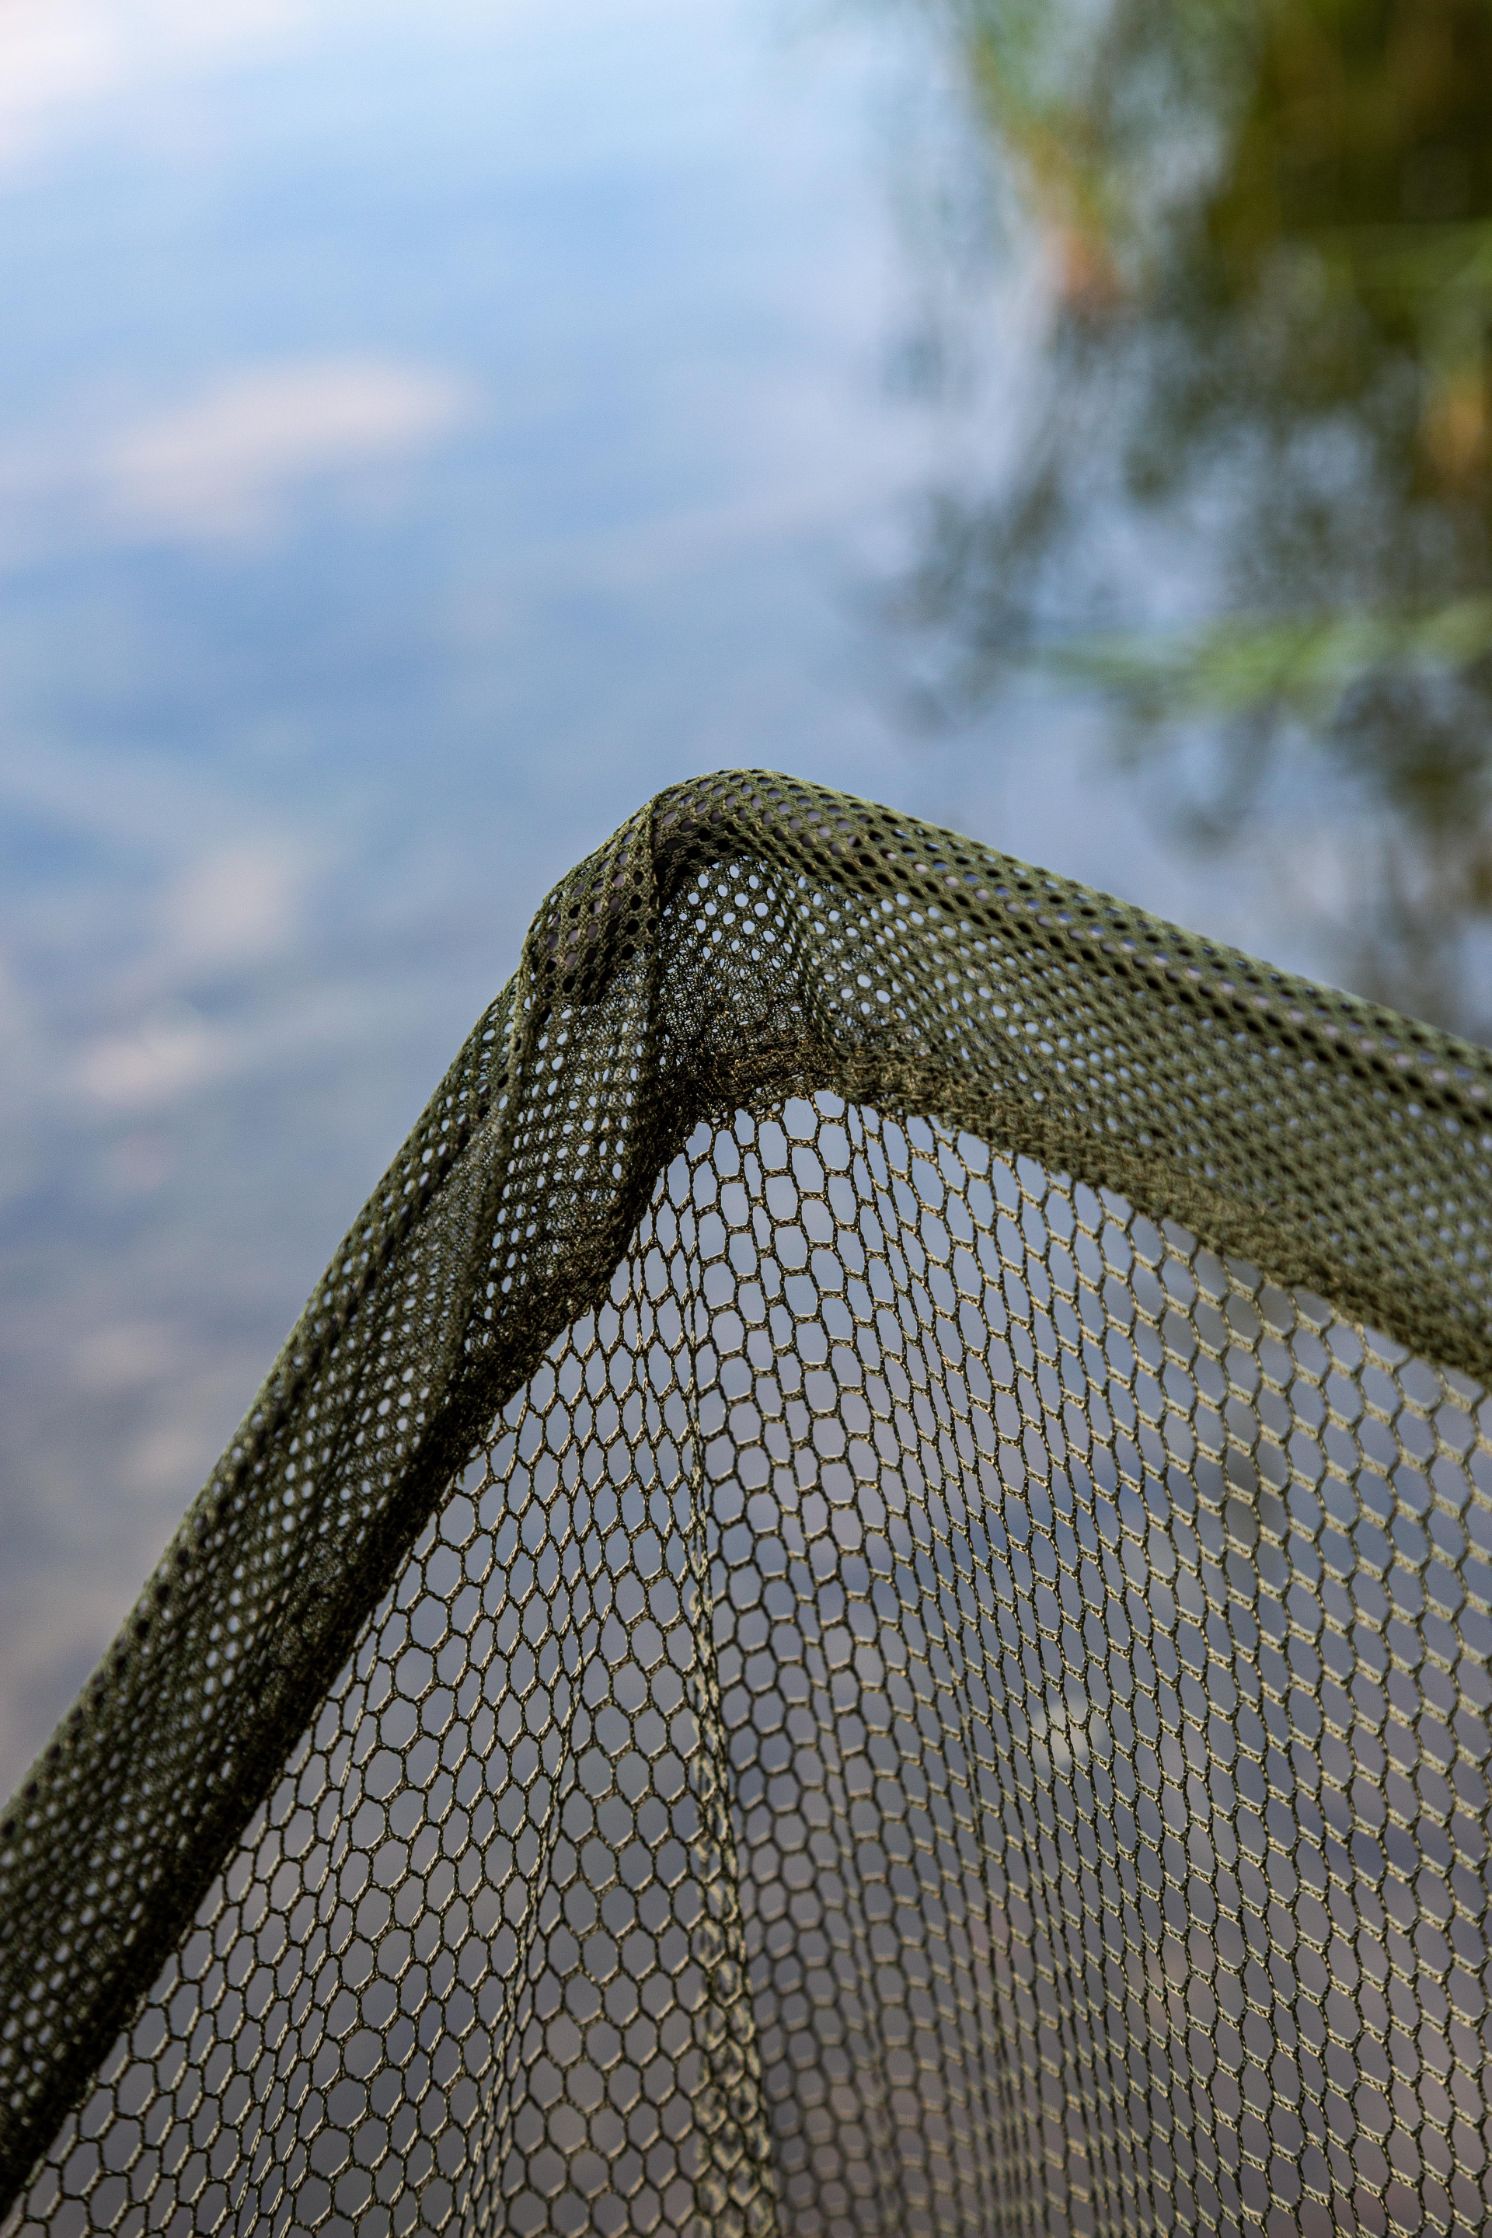 Ultimate DeLuxe Carp Net 42" with 2pcs Carbon Handle